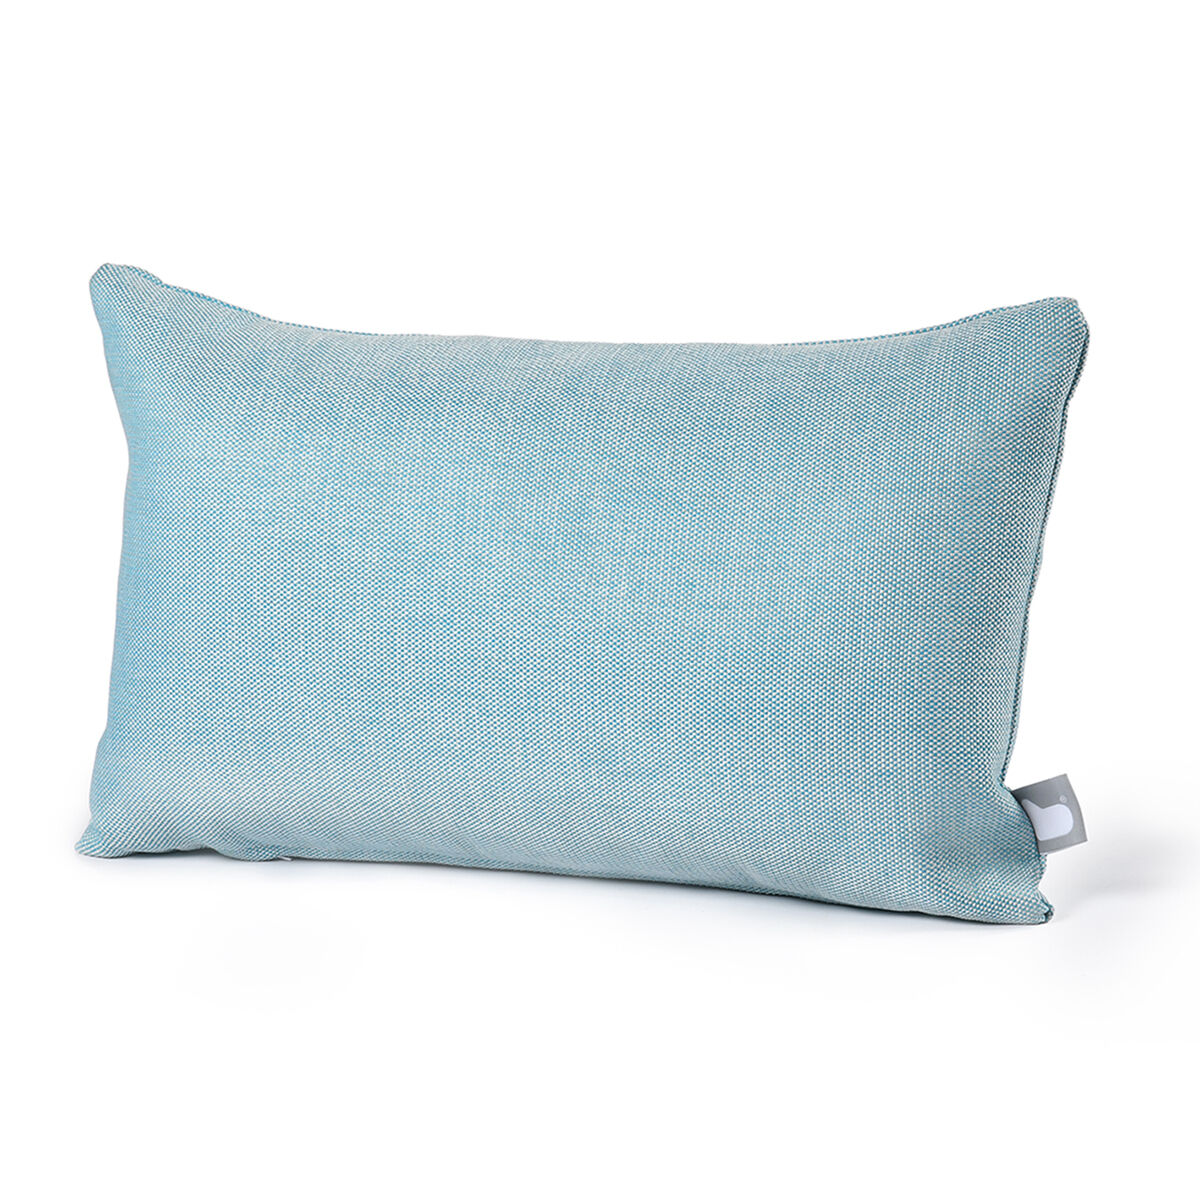 Maze - Pair of Outdoor Bolster Cushions (30x50cm) - Hermes Blue product image